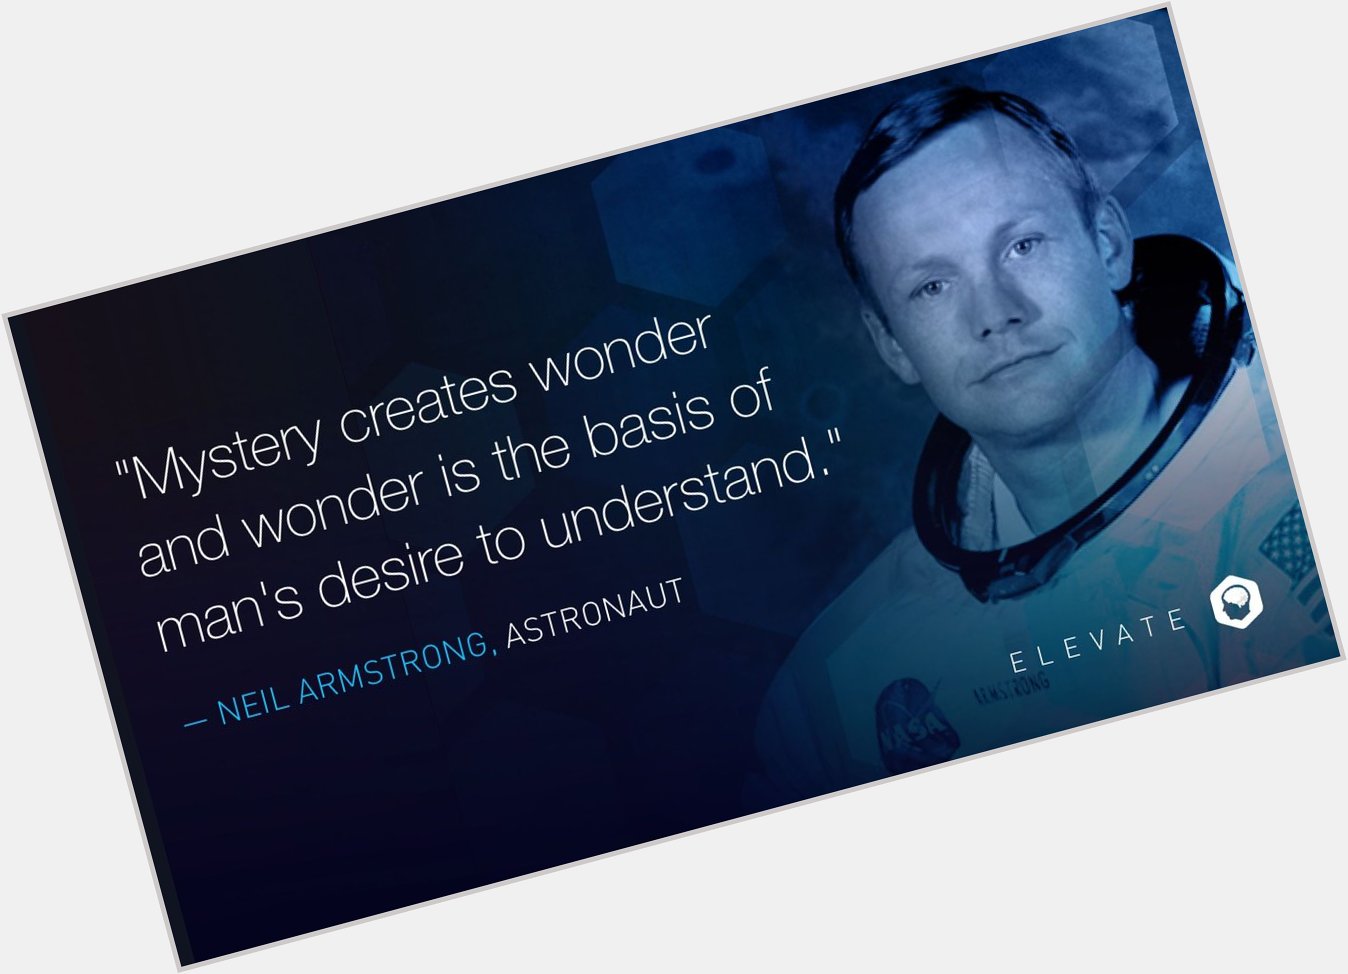 Happy birthday to American astronaut Neil Armstrong. He was the first person to walk on the moon. 